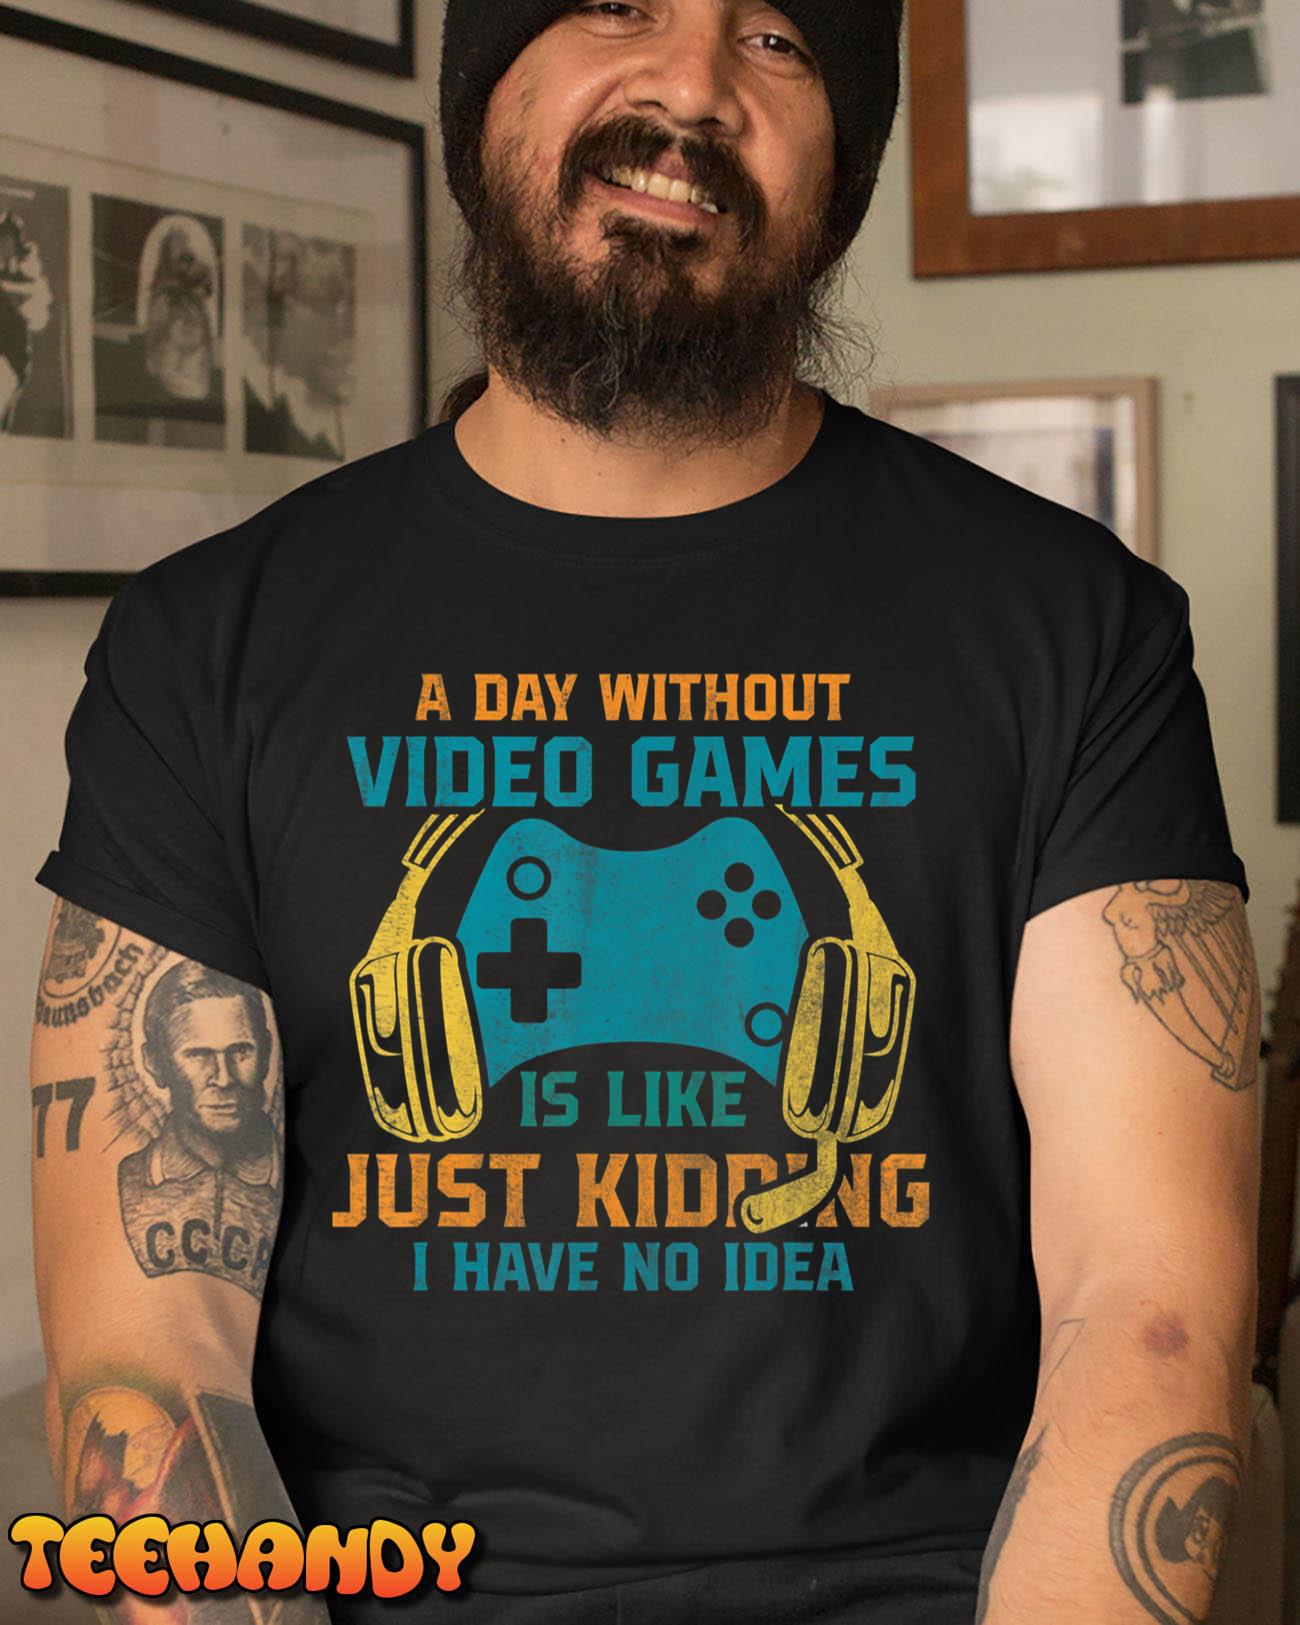 A DAY WITHOUT VIDEO GAMES IS LIKE, Funny Gaming Gamer T Shirt